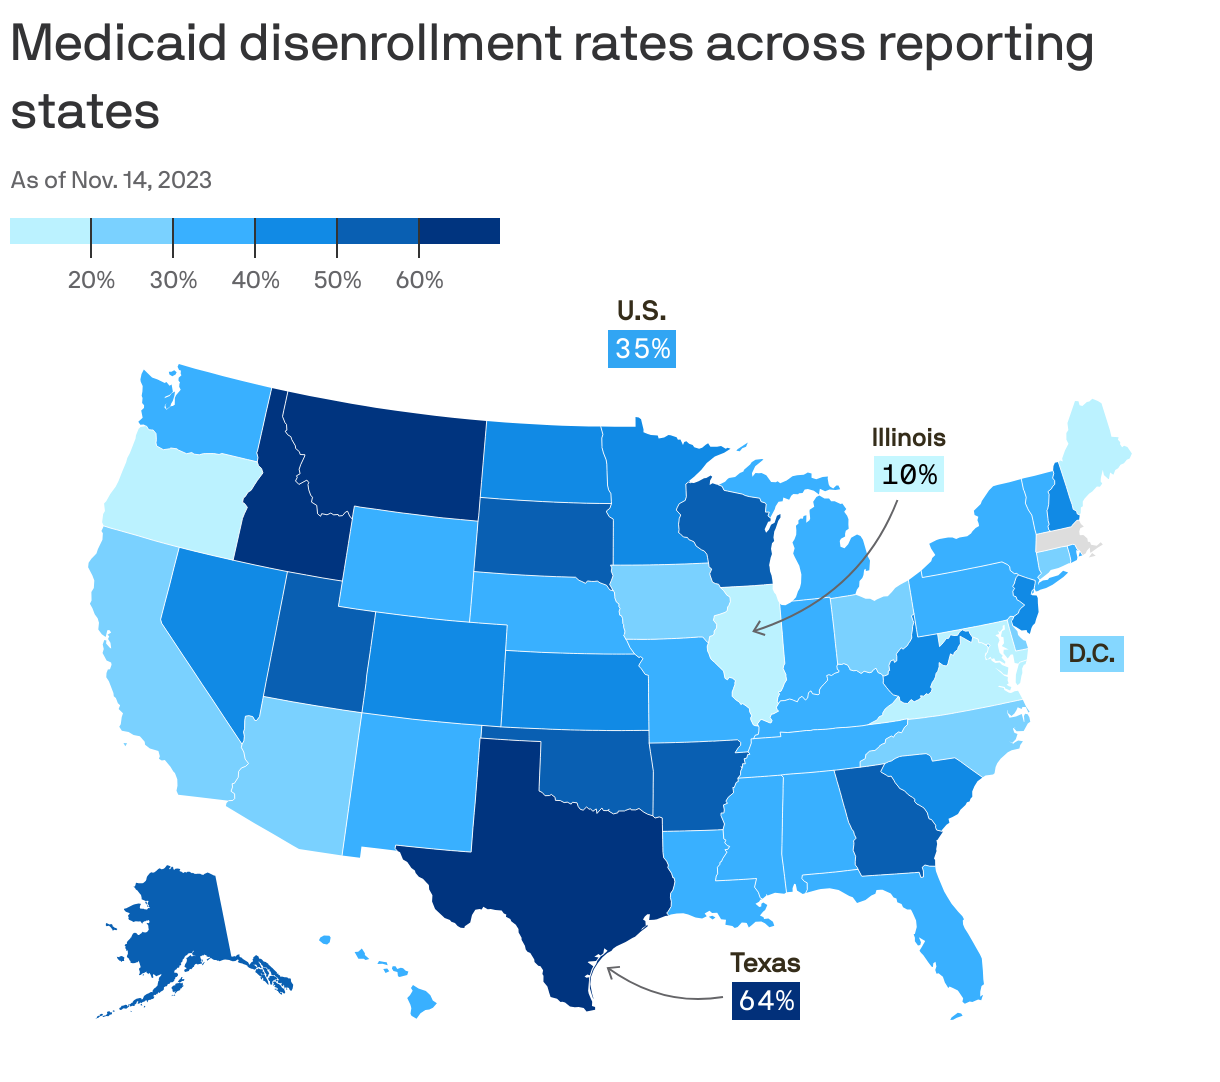 Medicaid disenrollment rates across reporting states